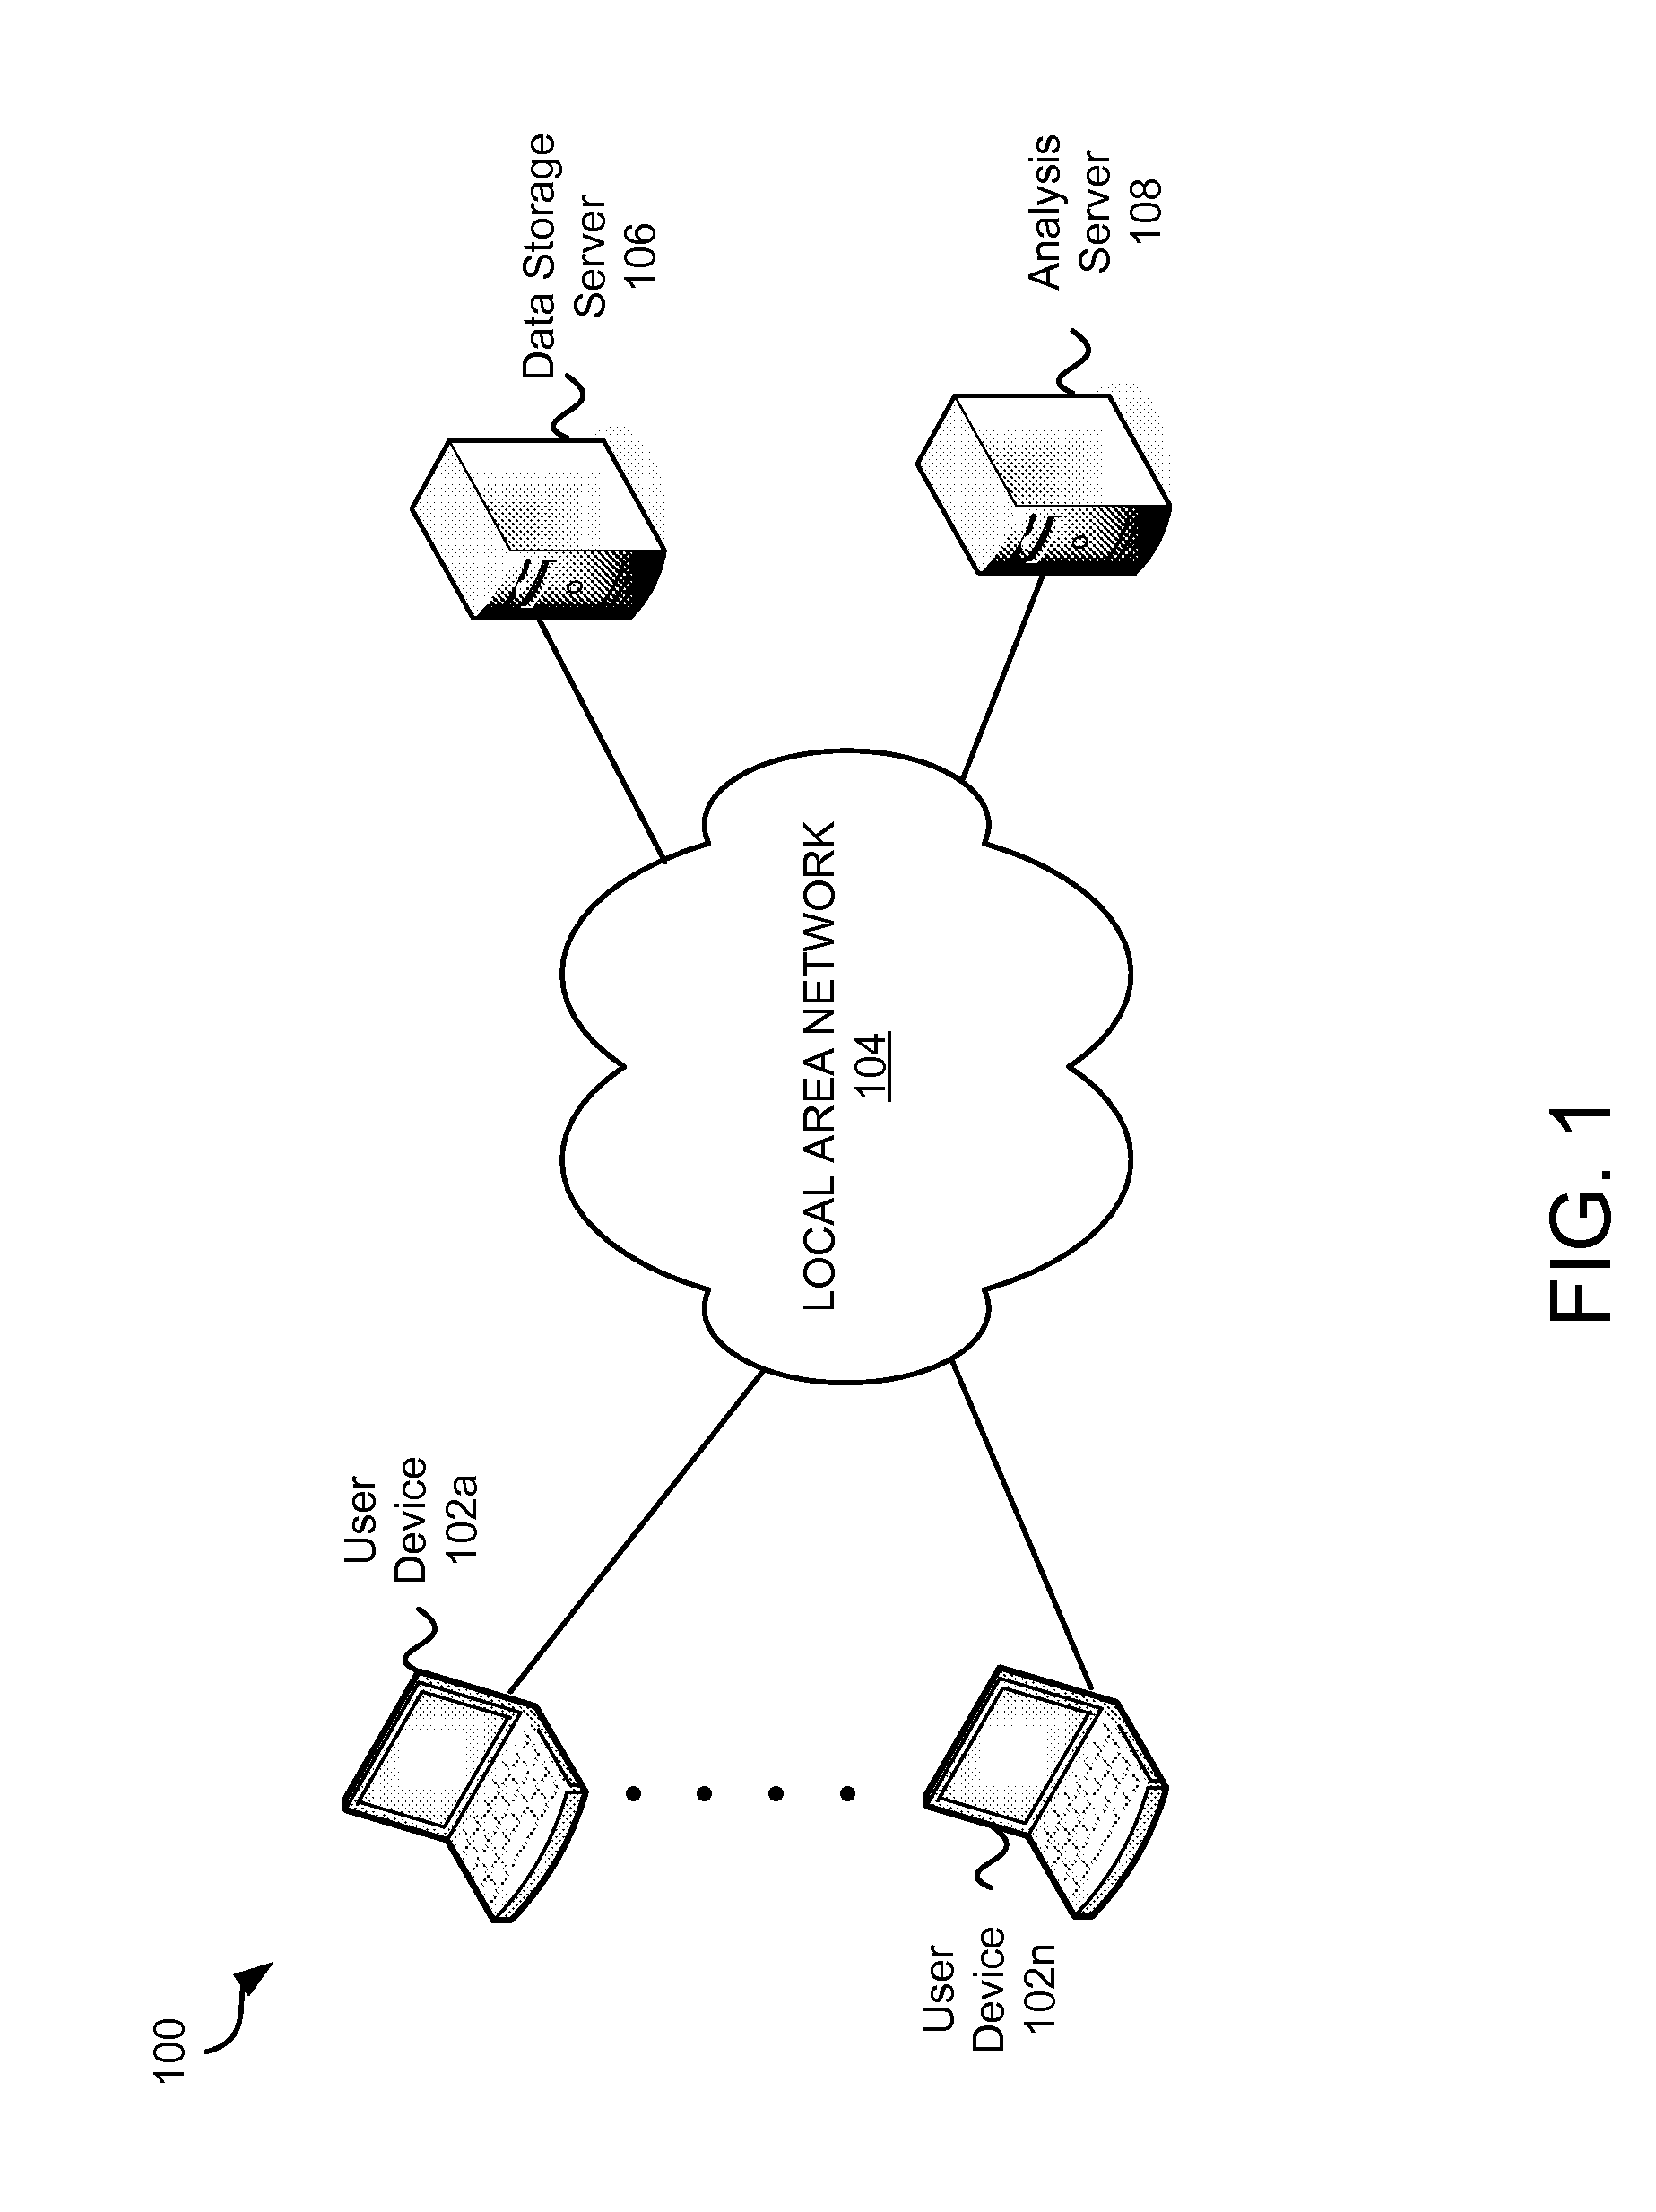 Systems and methods for metric data smoothing